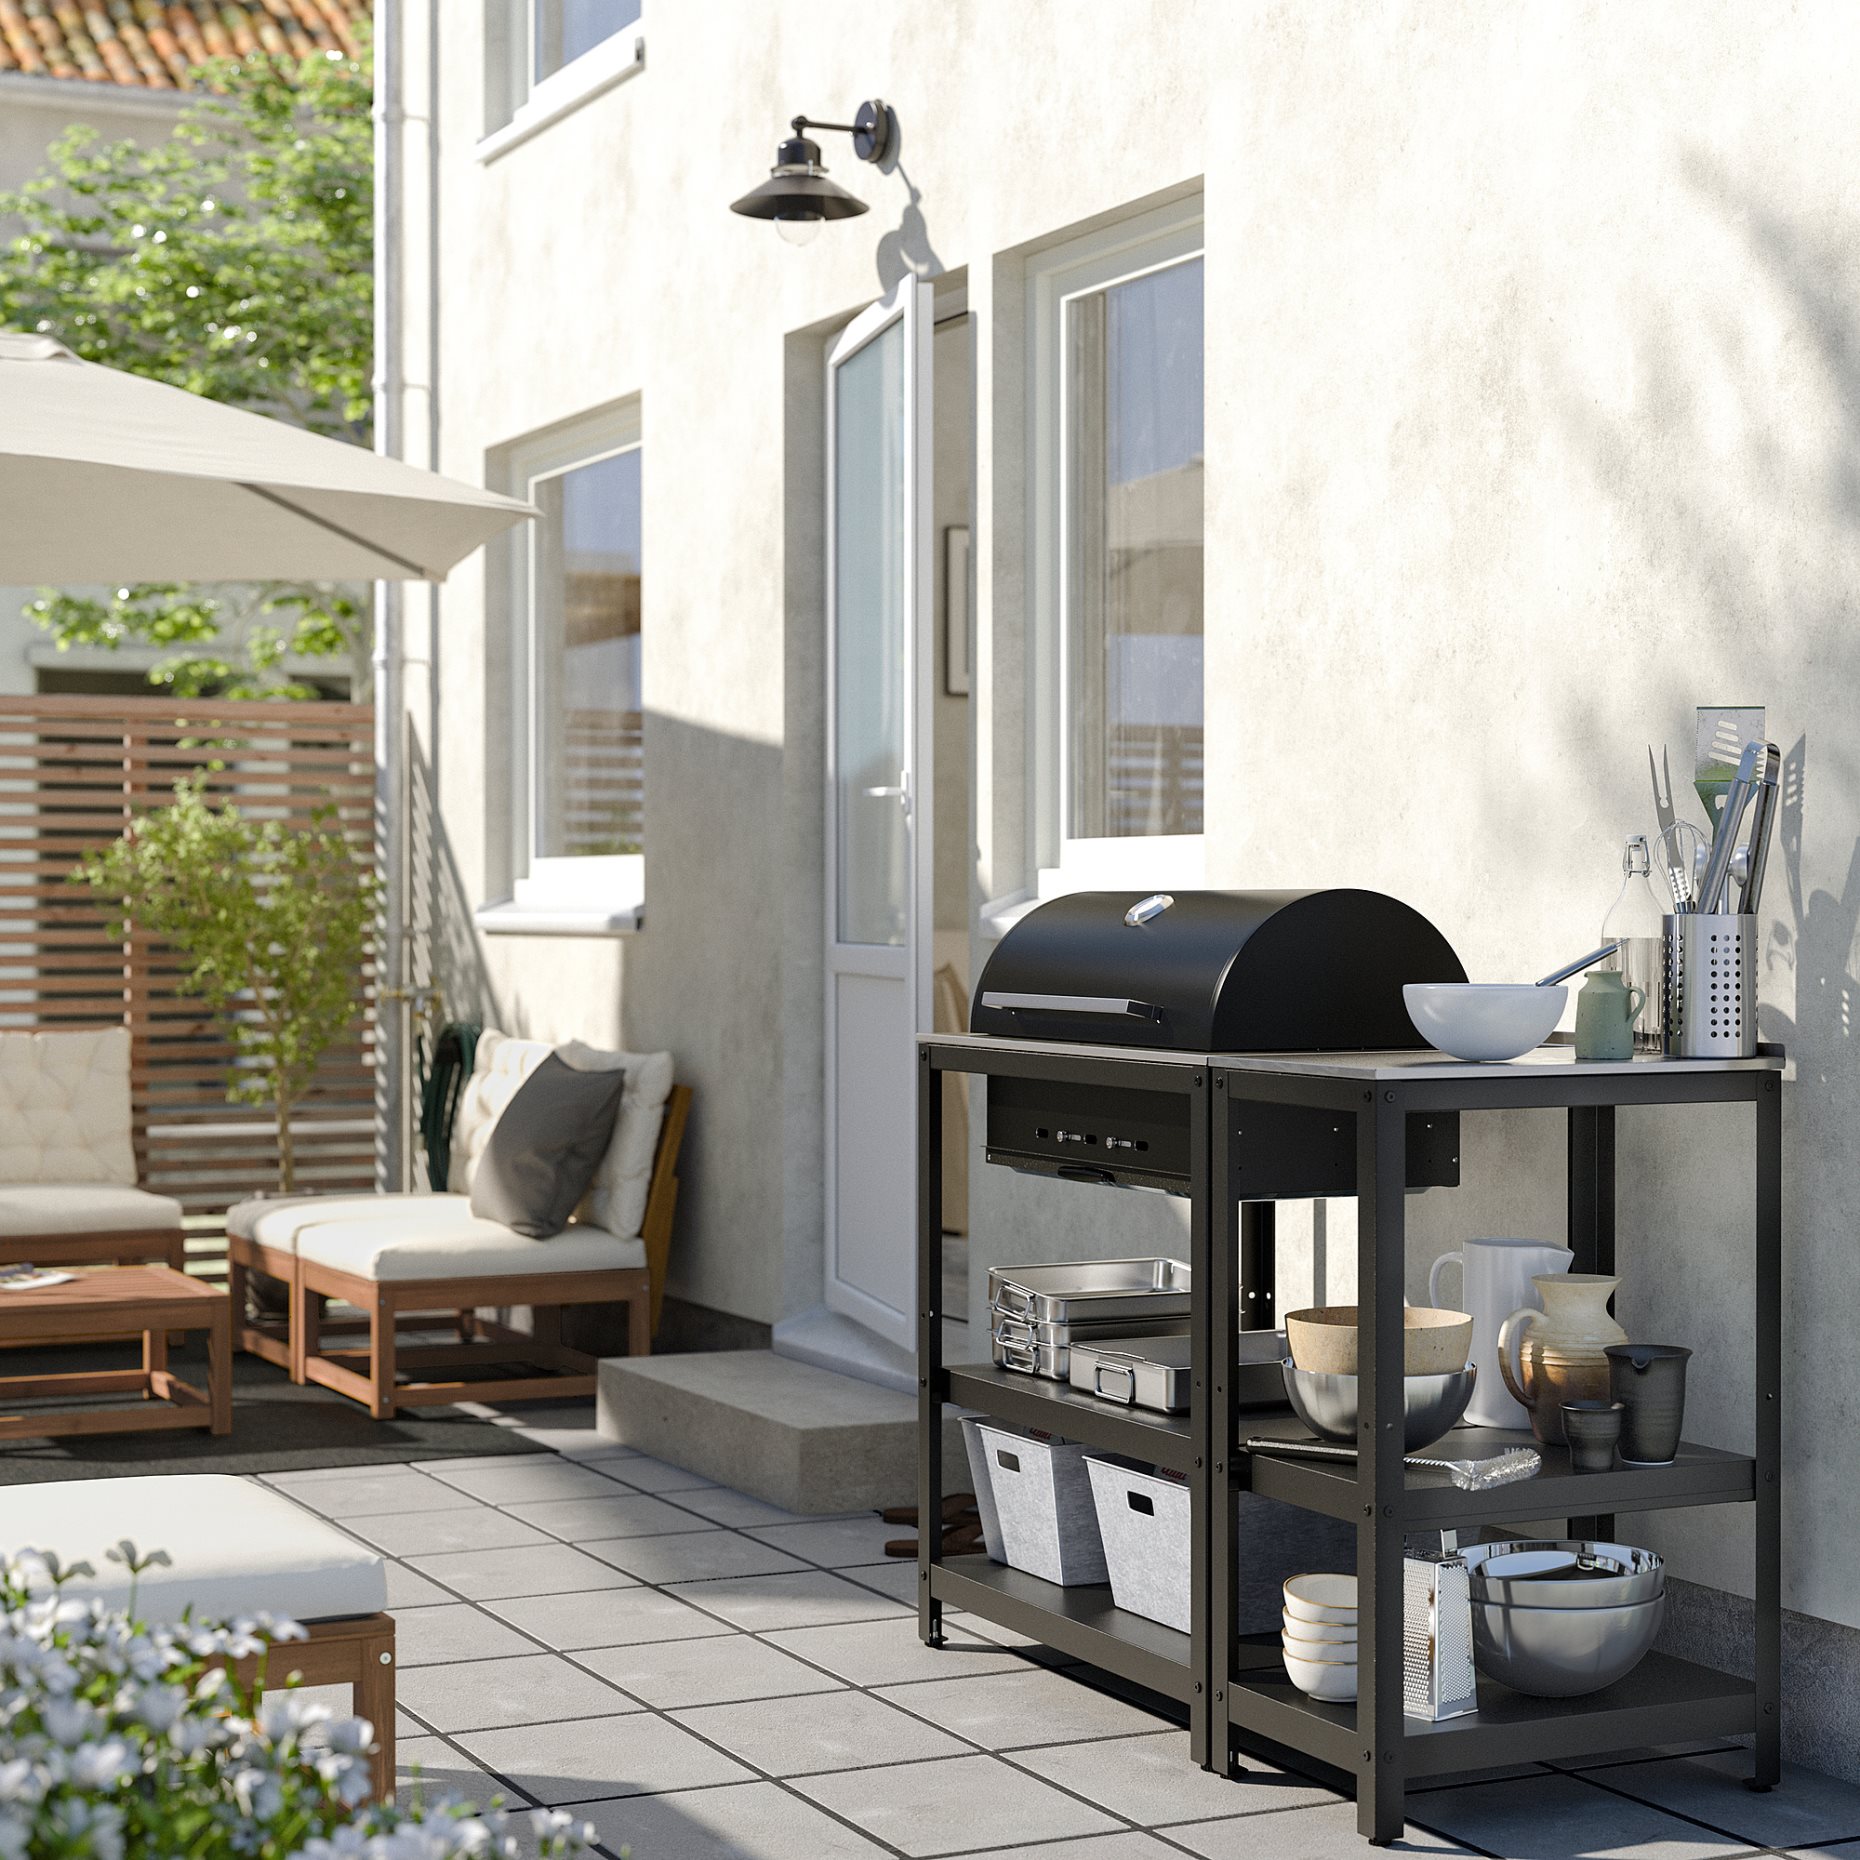 GRILLSKÄR, charcoal barbecue with kitchen island/outdoor, 125x61 cm, 994.952.38